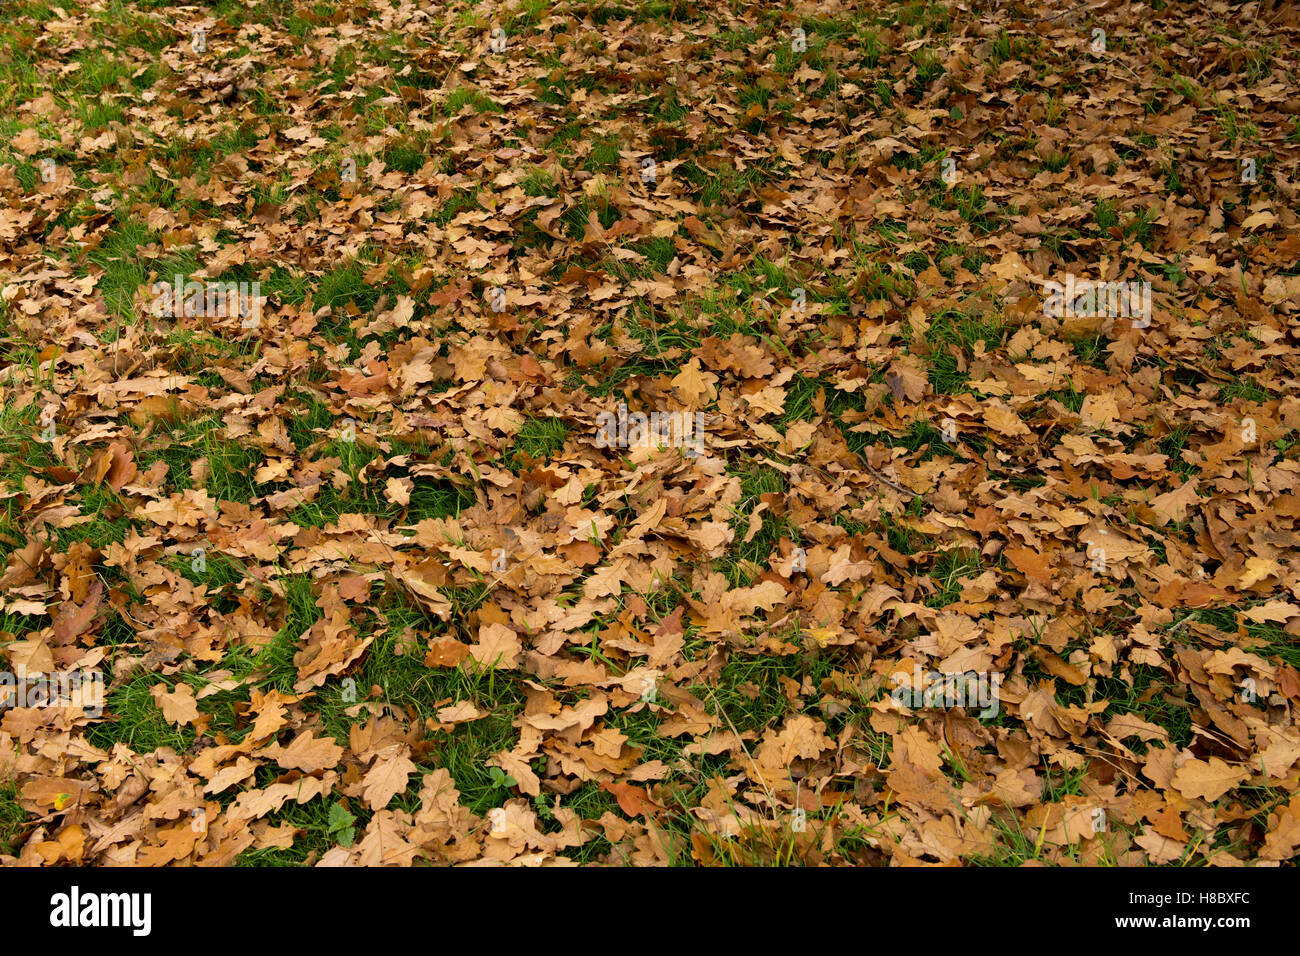 Golden brown fallen leaves of an English oak tree, Quercus robur lying on the grass in autumn, October Stock Photo